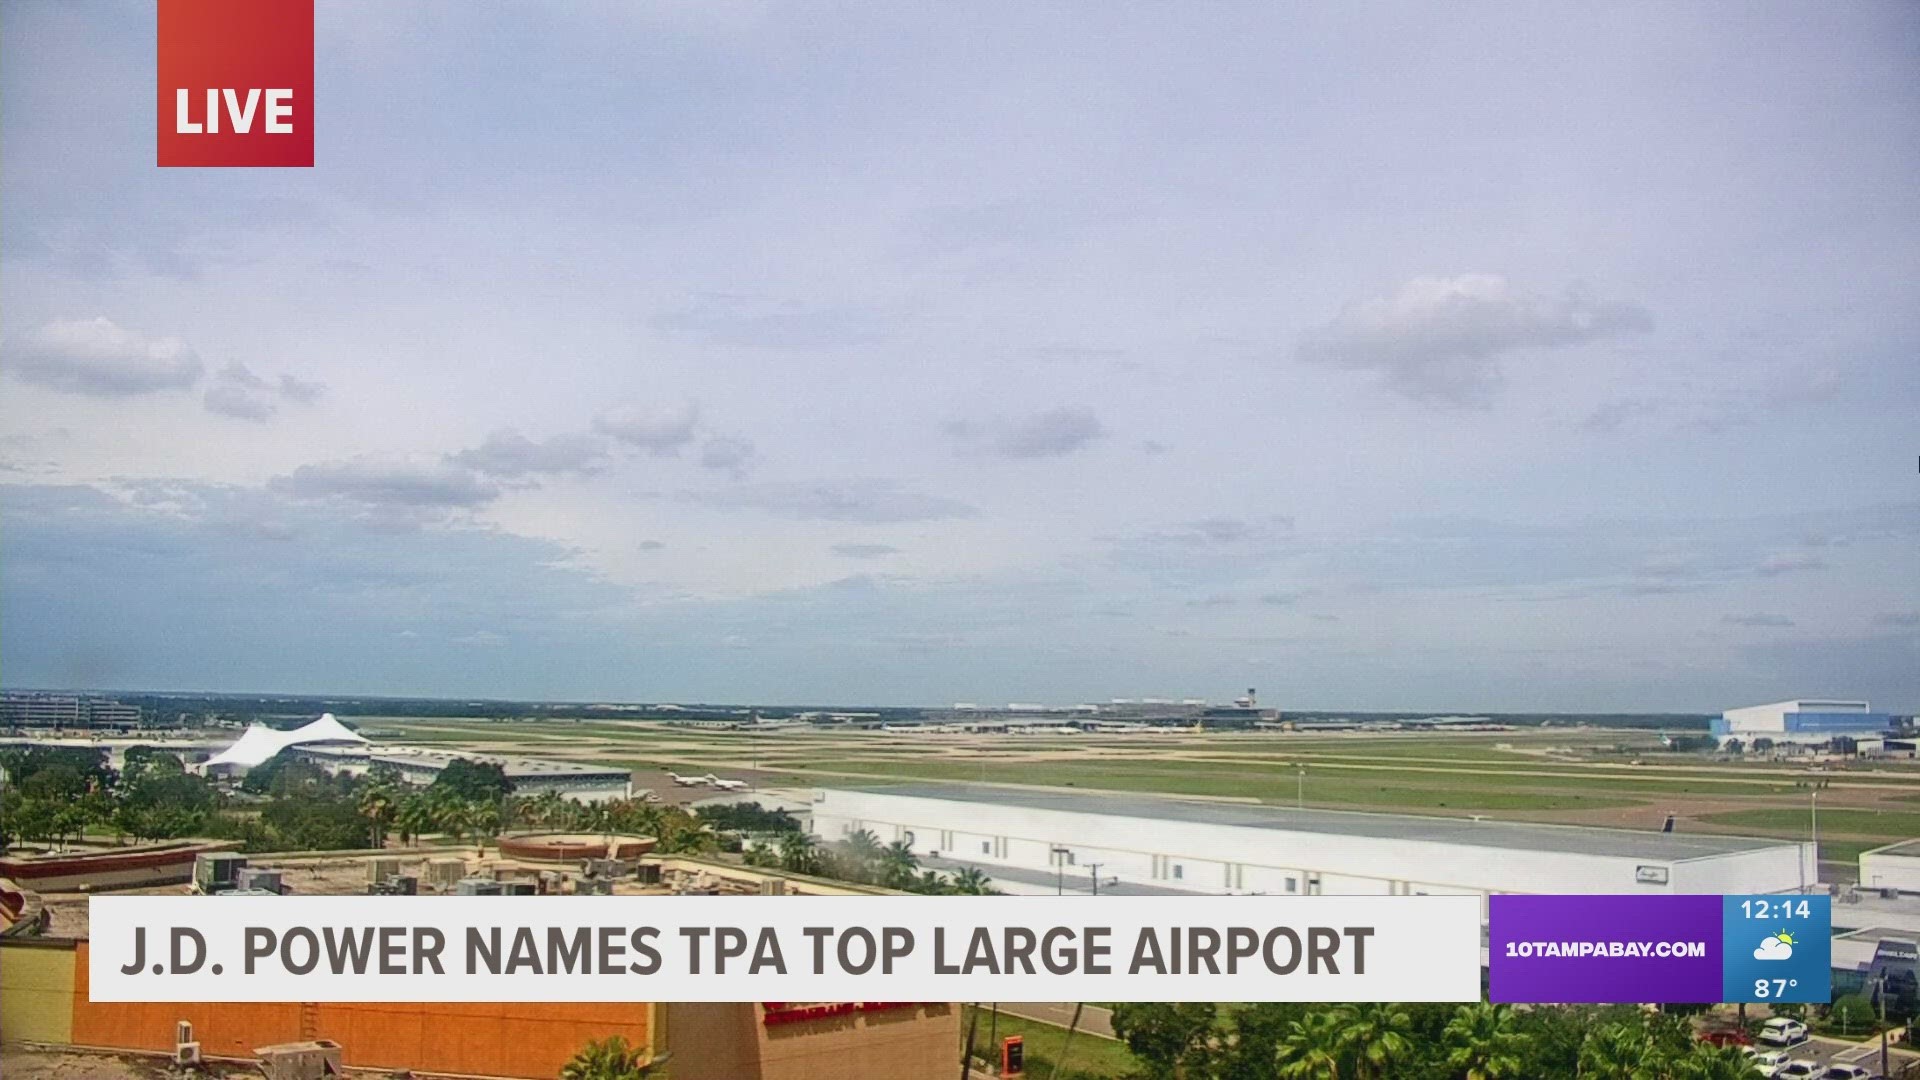 This is the second year in a row the Tampa International Airport has won this award.